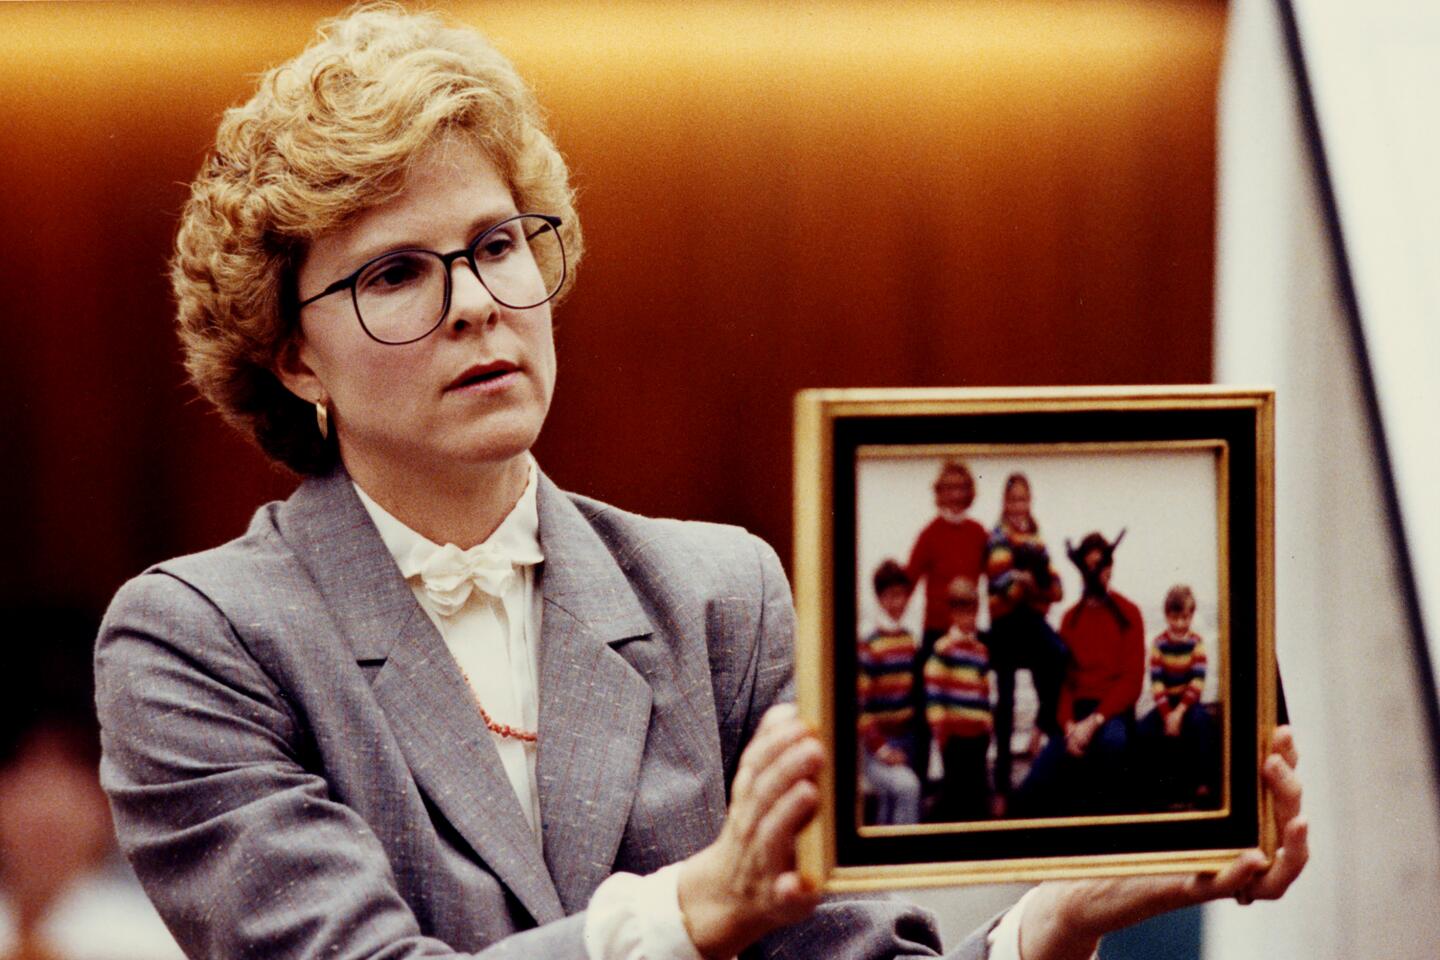 Prosecutor Kerry Wells holds a photograph during the trial on Oct. 15, 1991.